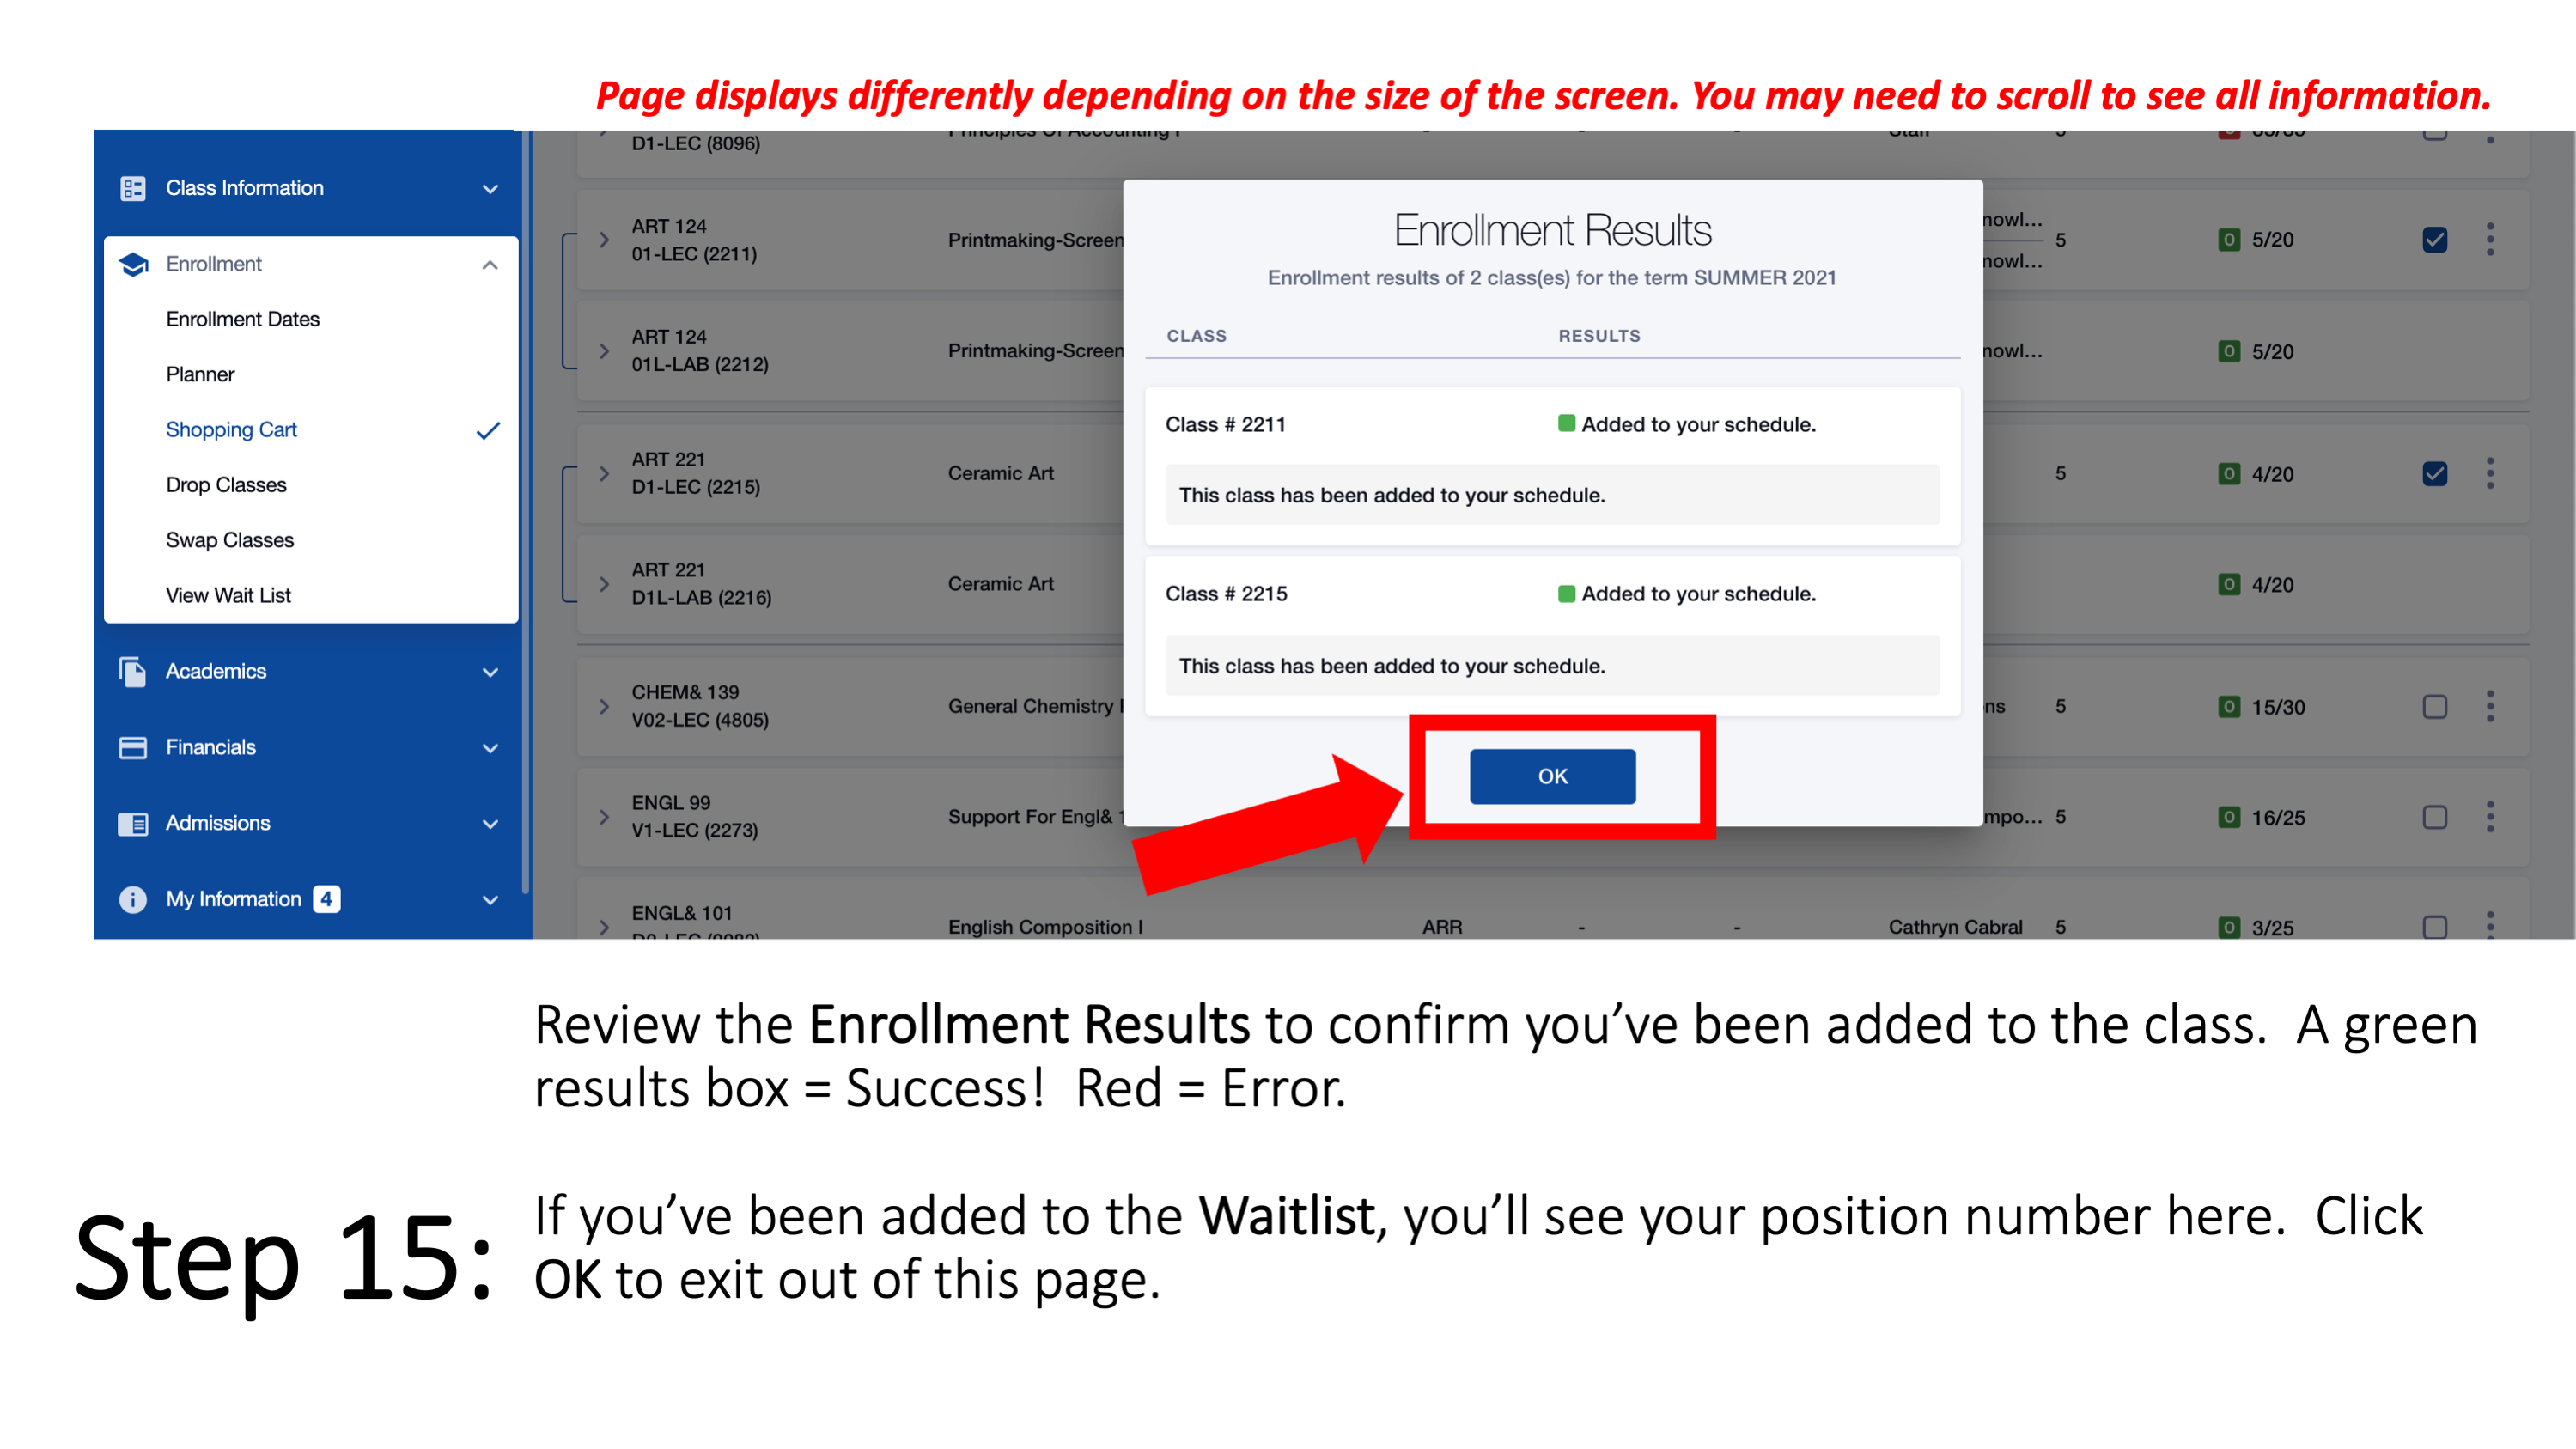 Step 15: Review the Enrollment Results to confirm you’ve been added to the class.  A green results box = Success!  Red = Error. If you’ve been added to the Waitlist, you’ll see your position number here.  Click OK to exit out of this page. Page displays differently depending on the size of the screen. You may need to scroll to see all information.